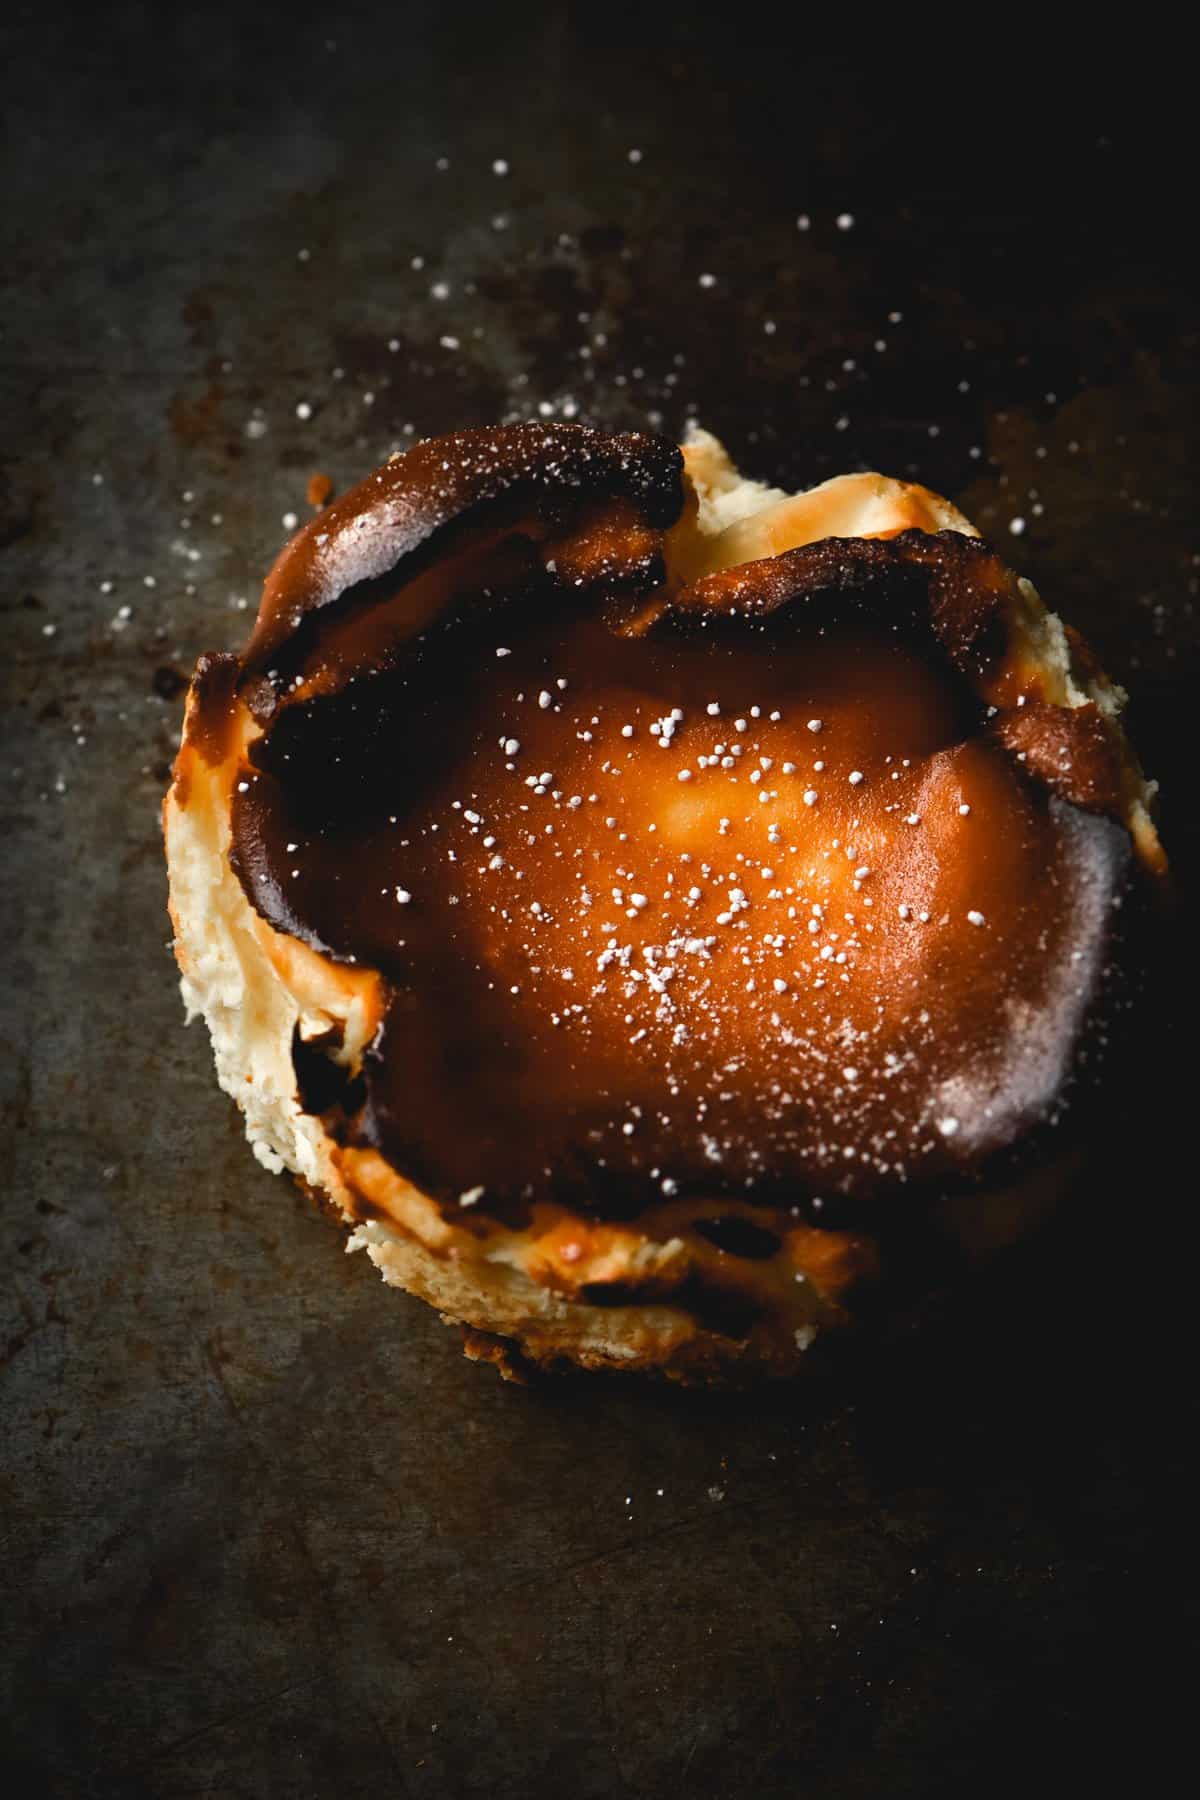 A moody aerial view of a Burnt Basque style mini cheesecake, sprinkled with icing sugar and set against a dark metal backdrop